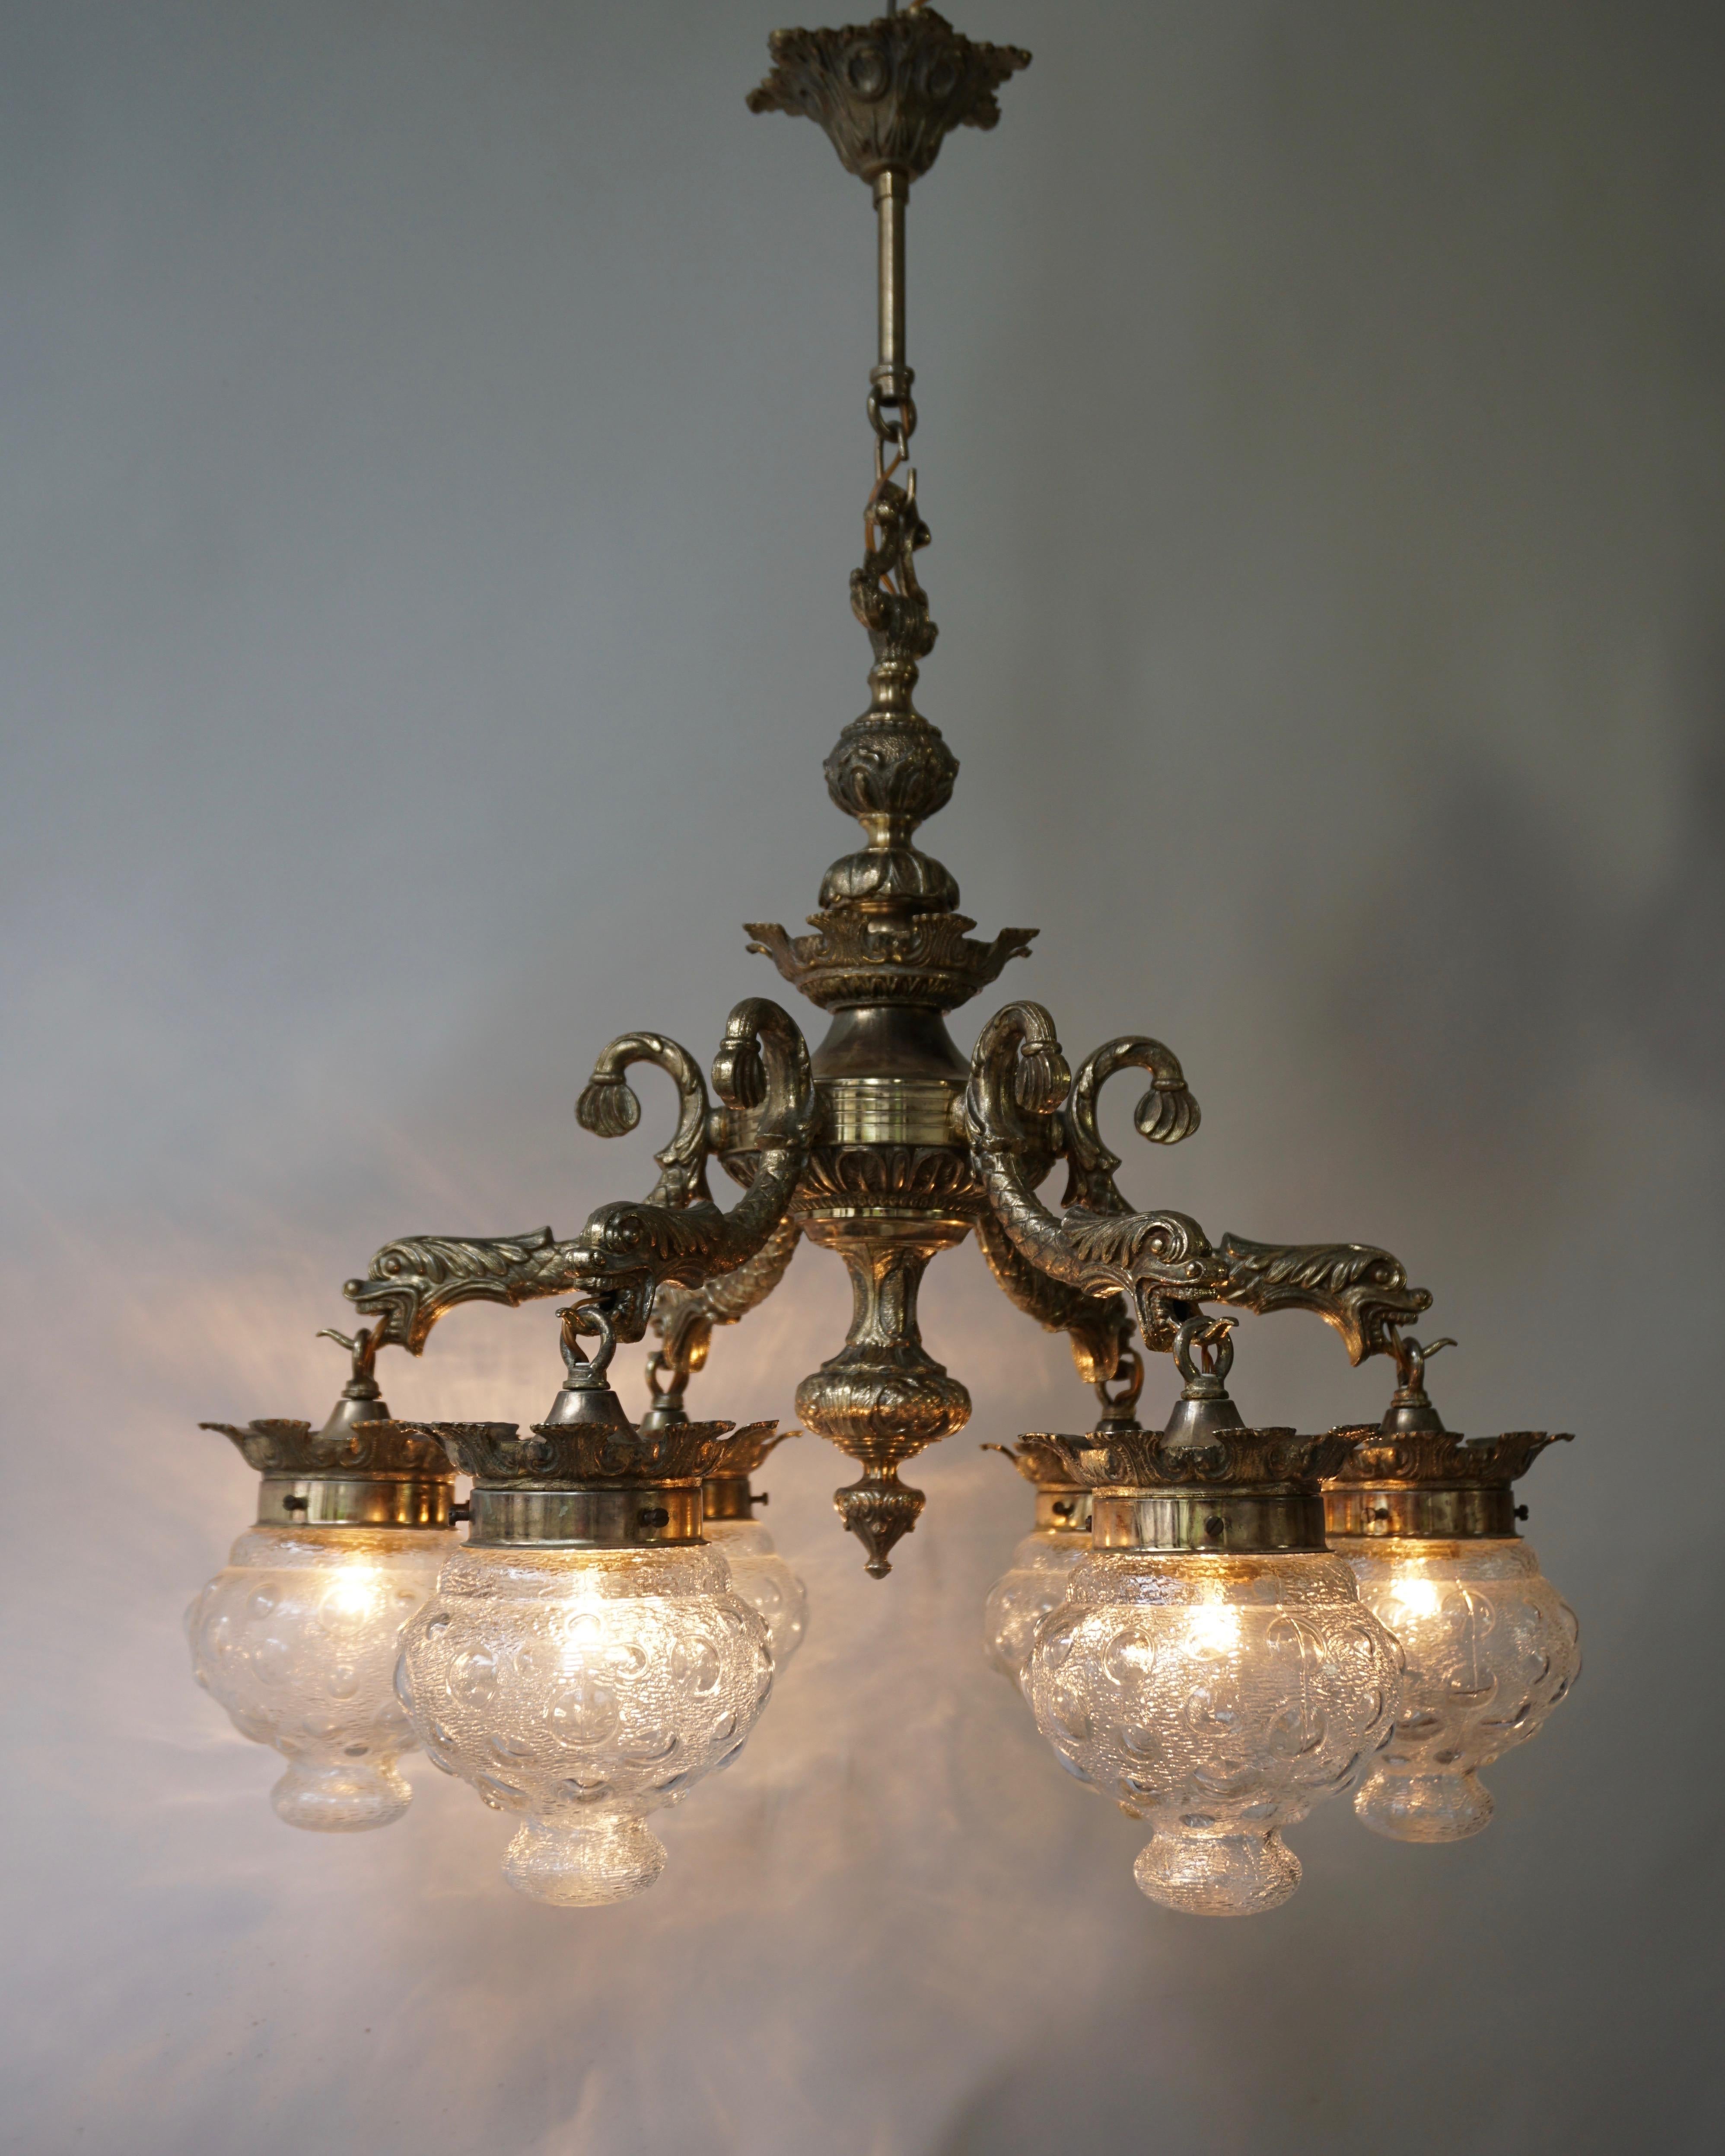 This chandelier comes with six arms and on the end of each arm there is a stunning dragon. They have a fierce expression and when you turn the light switch they will spit their fire and light your table and room. Why settle for dull when you can